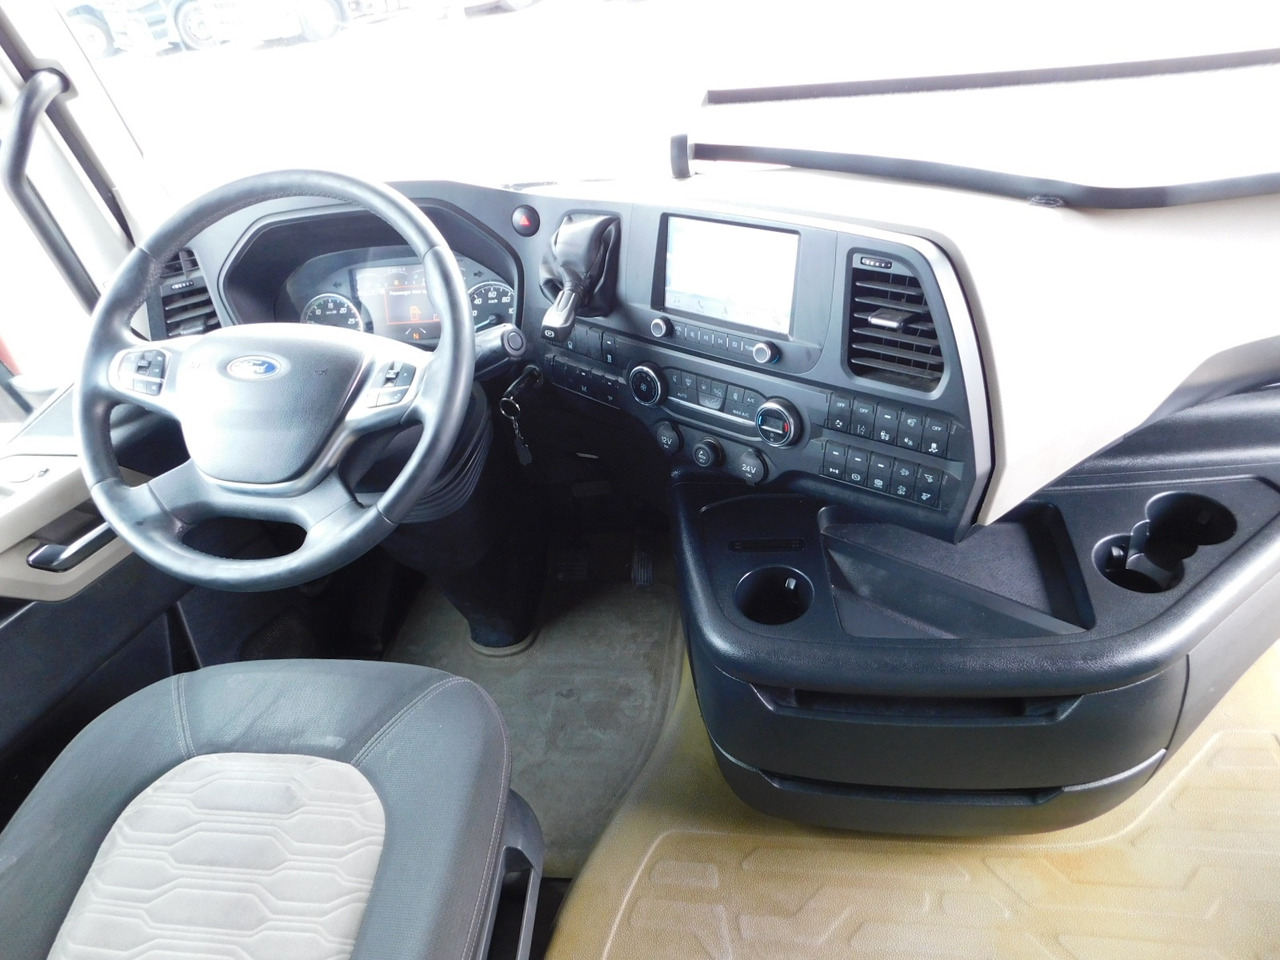 Tracteur routier Ford F max: photos 7